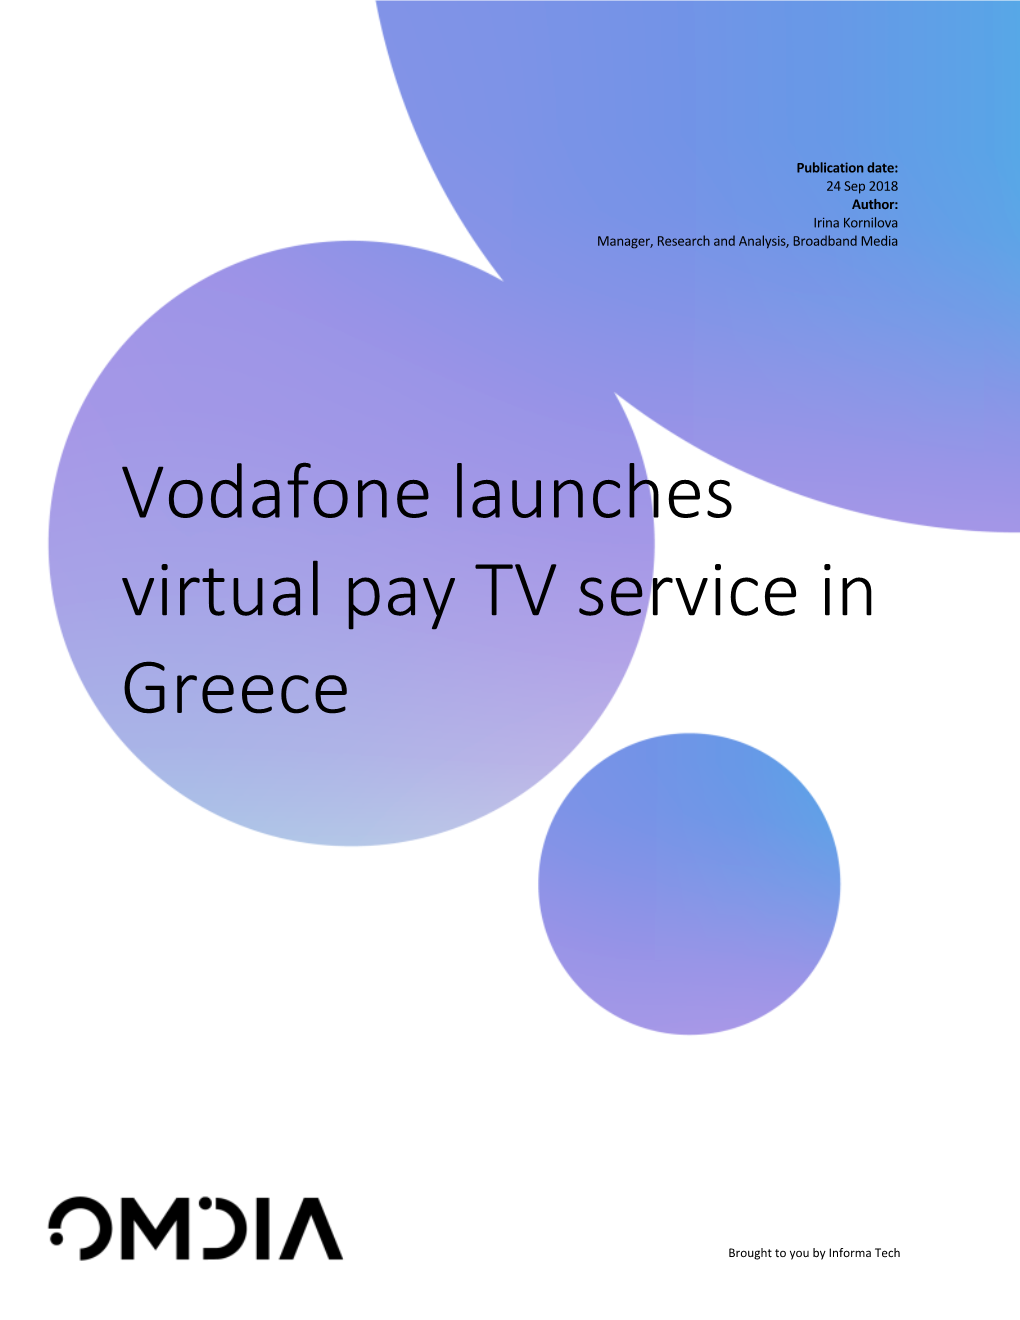 Vodafone Launches Virtual Pay TV Service in Greece